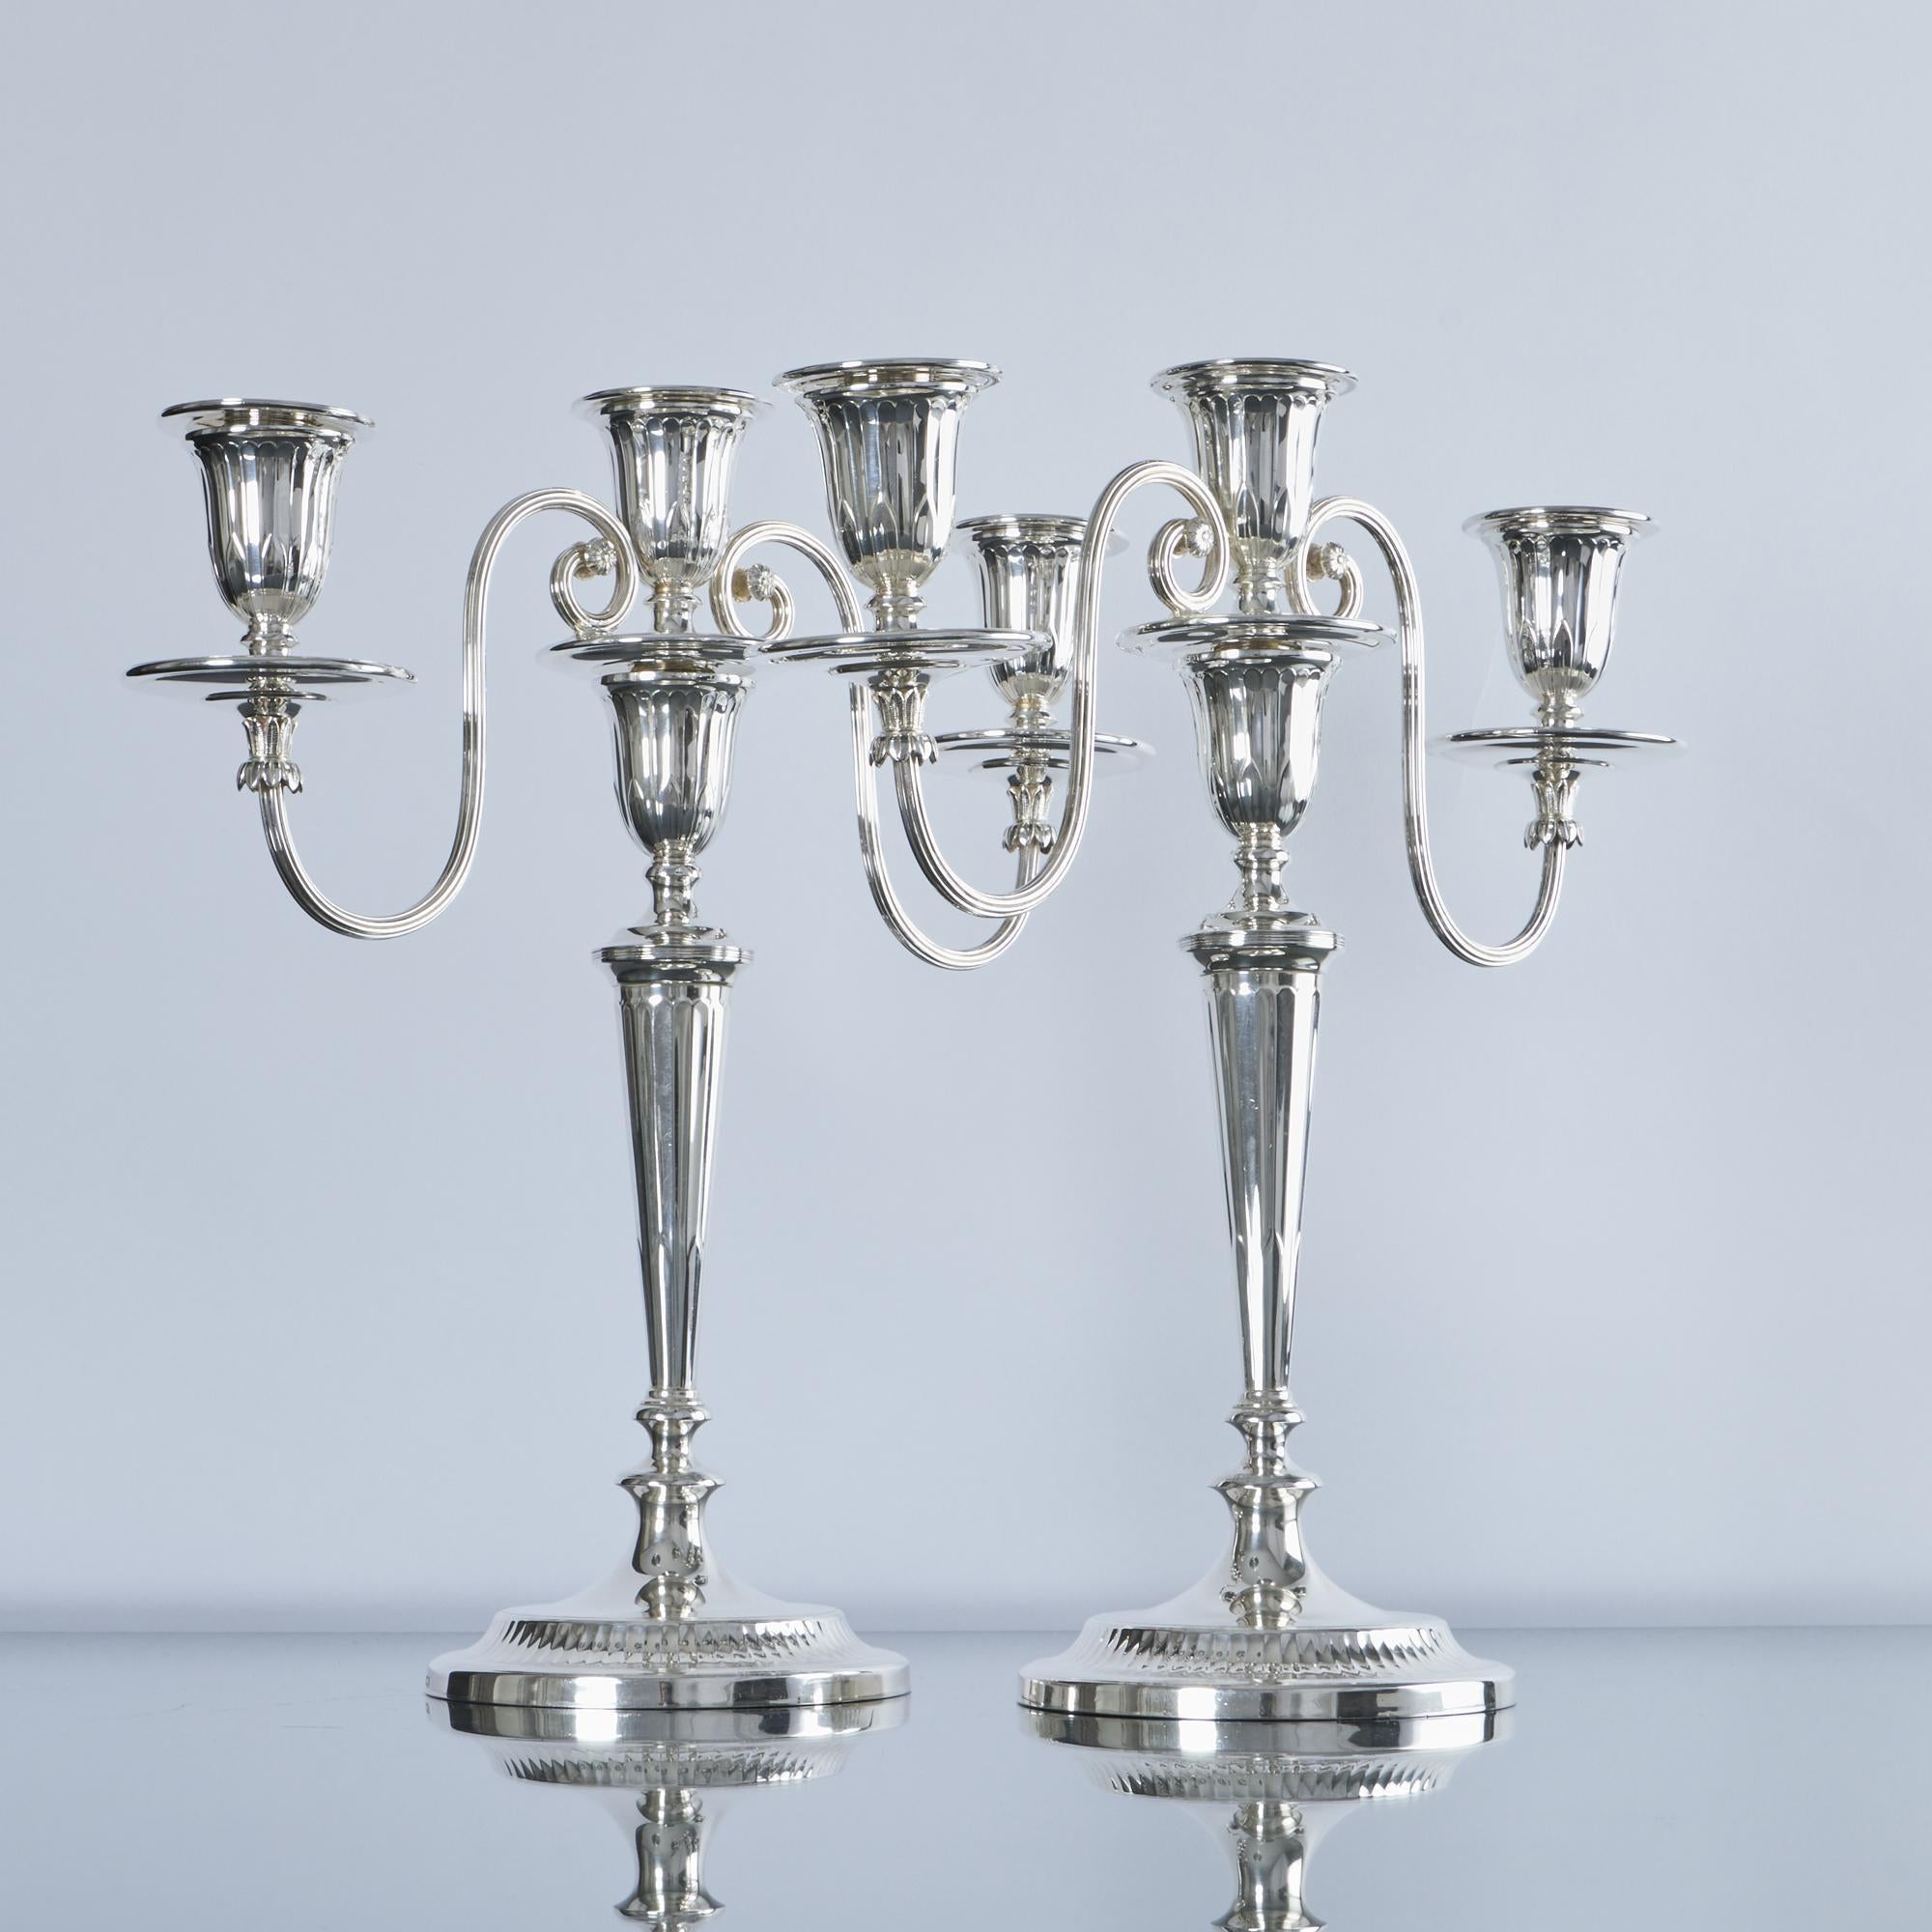 Very good pair of elegant two-branch, three-light, neoclassical silver candelabra in the Adam style. The branches are detachable, allowing the candlesticks to be used separately and the the wax drips or nozzles are also detachable, making them